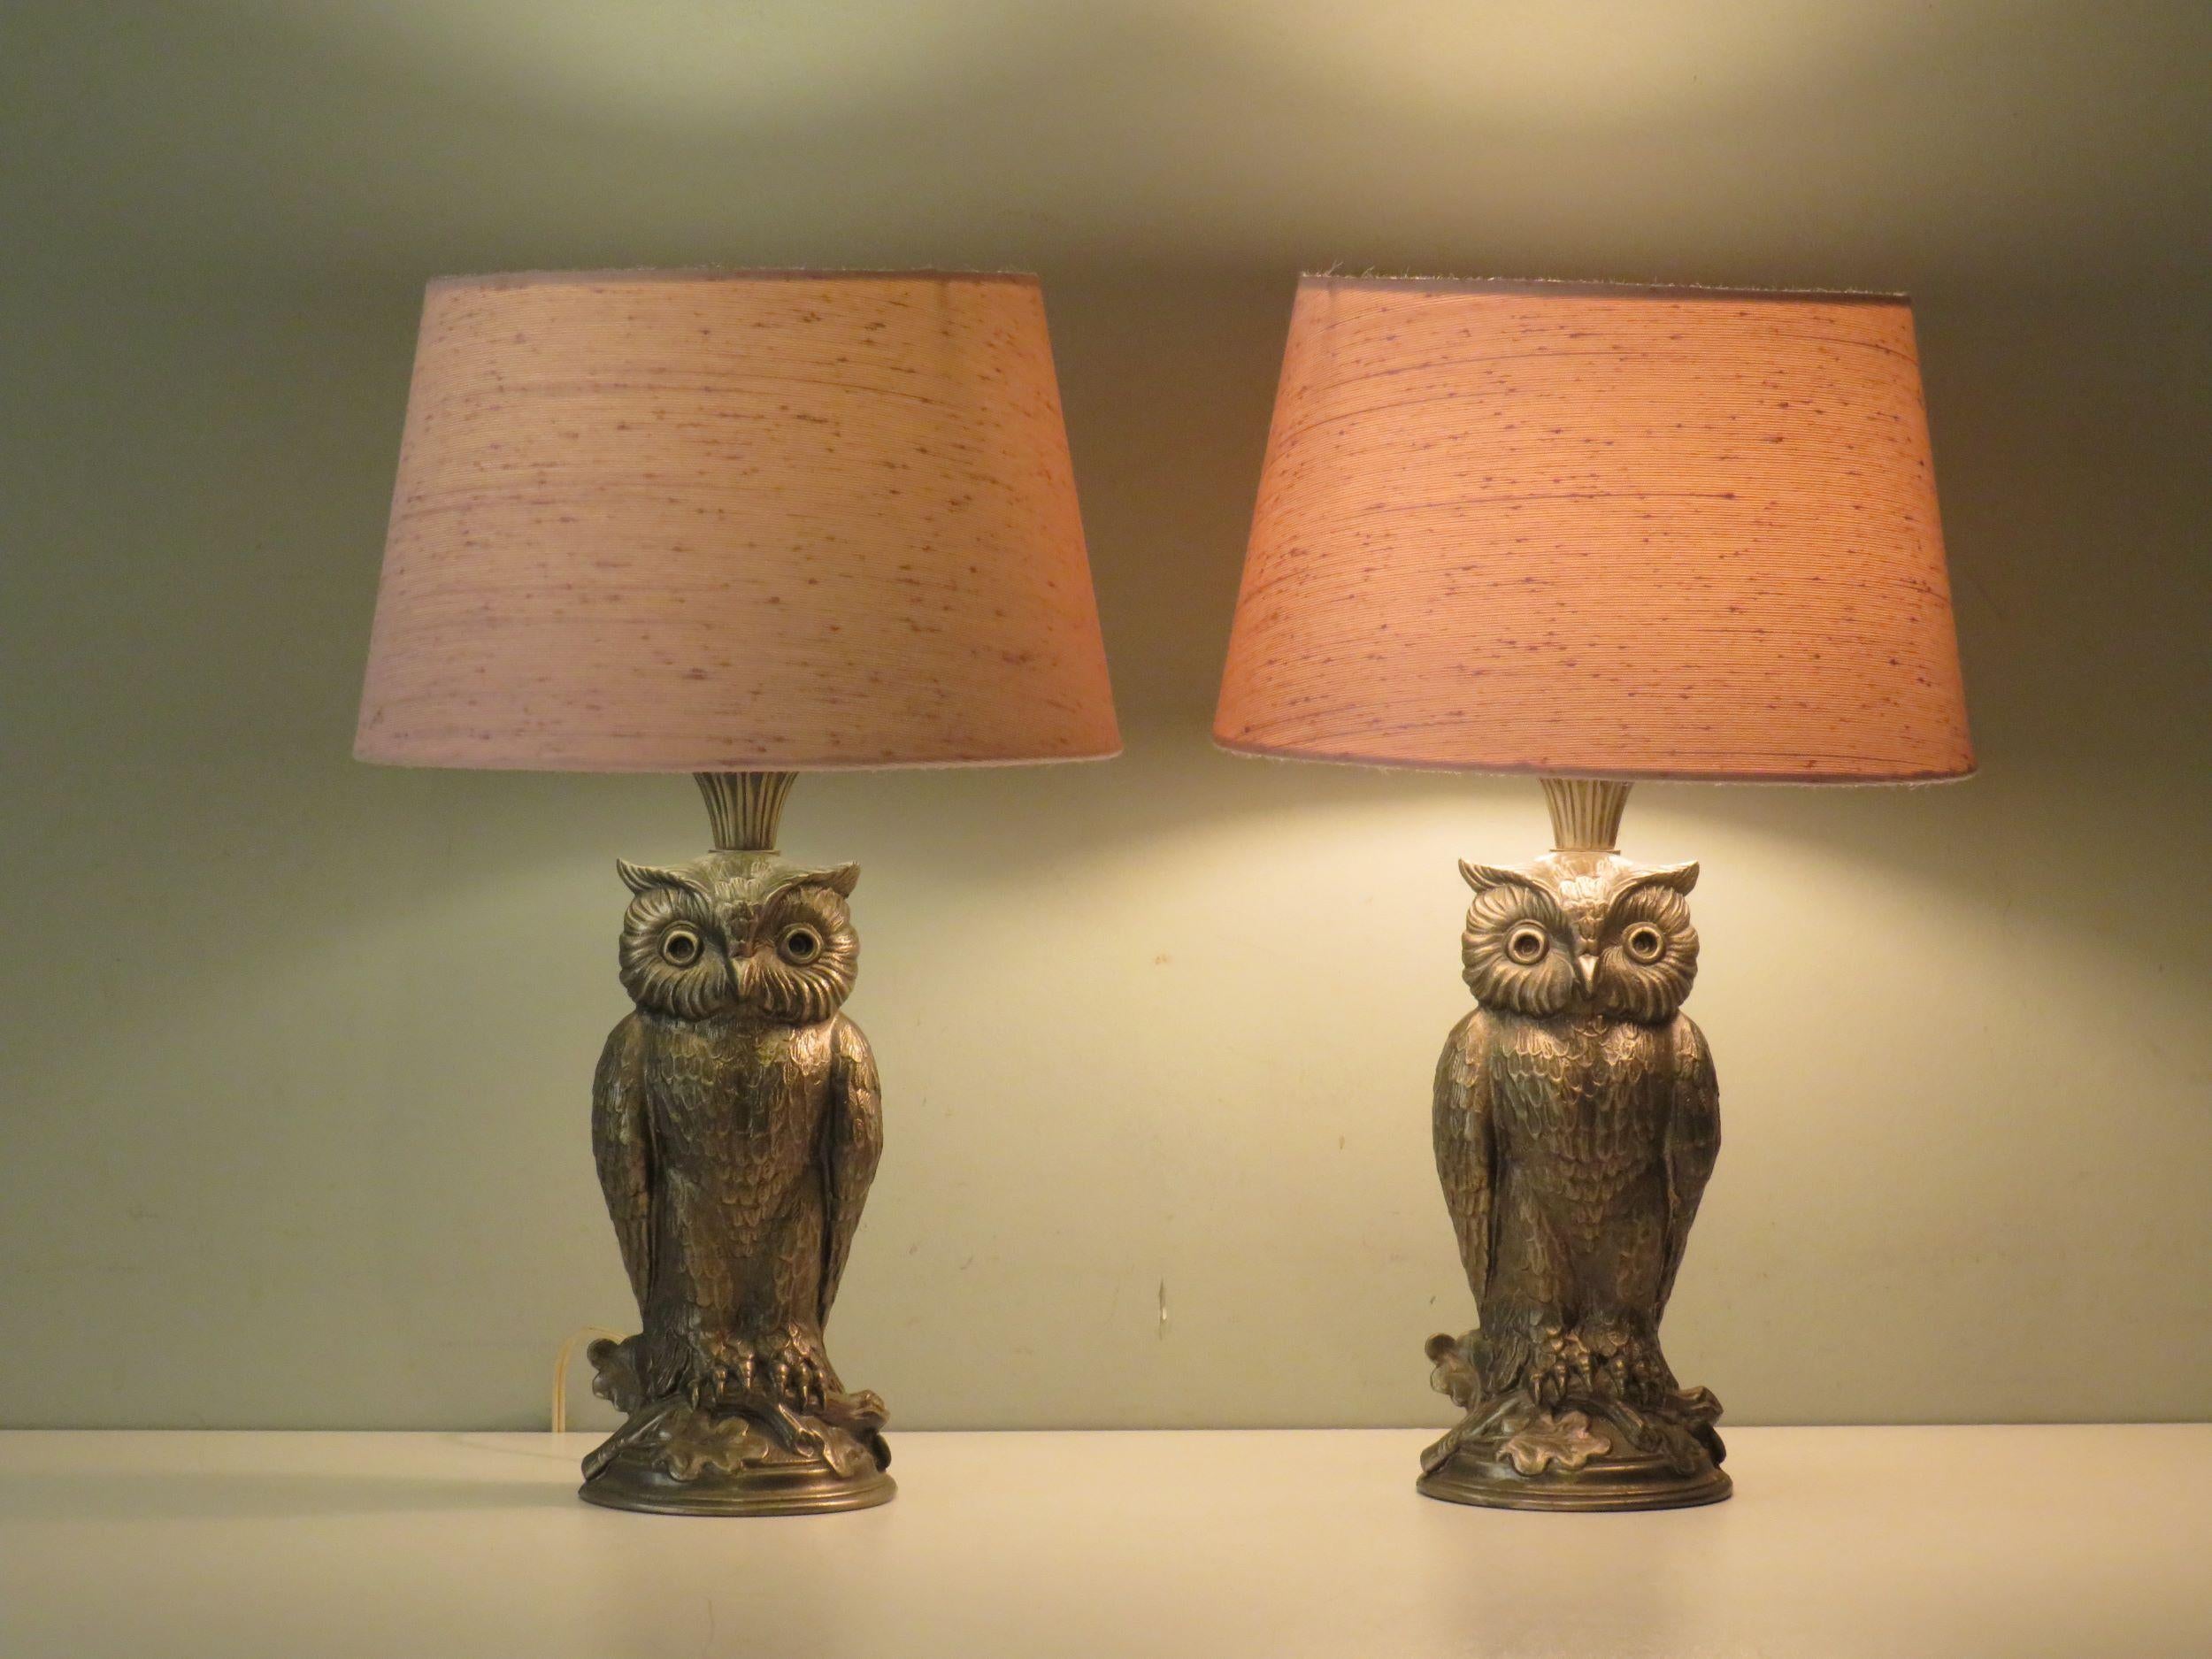 Set of 2 stylish silver metal lamps in the shape of an owl.
The beautiful quality lamps with 1 E 27 fitting and a (new) custom-made lampshade in light pink fabric with gray accents.
The accompanying photos of the lamps in lit condition show 2